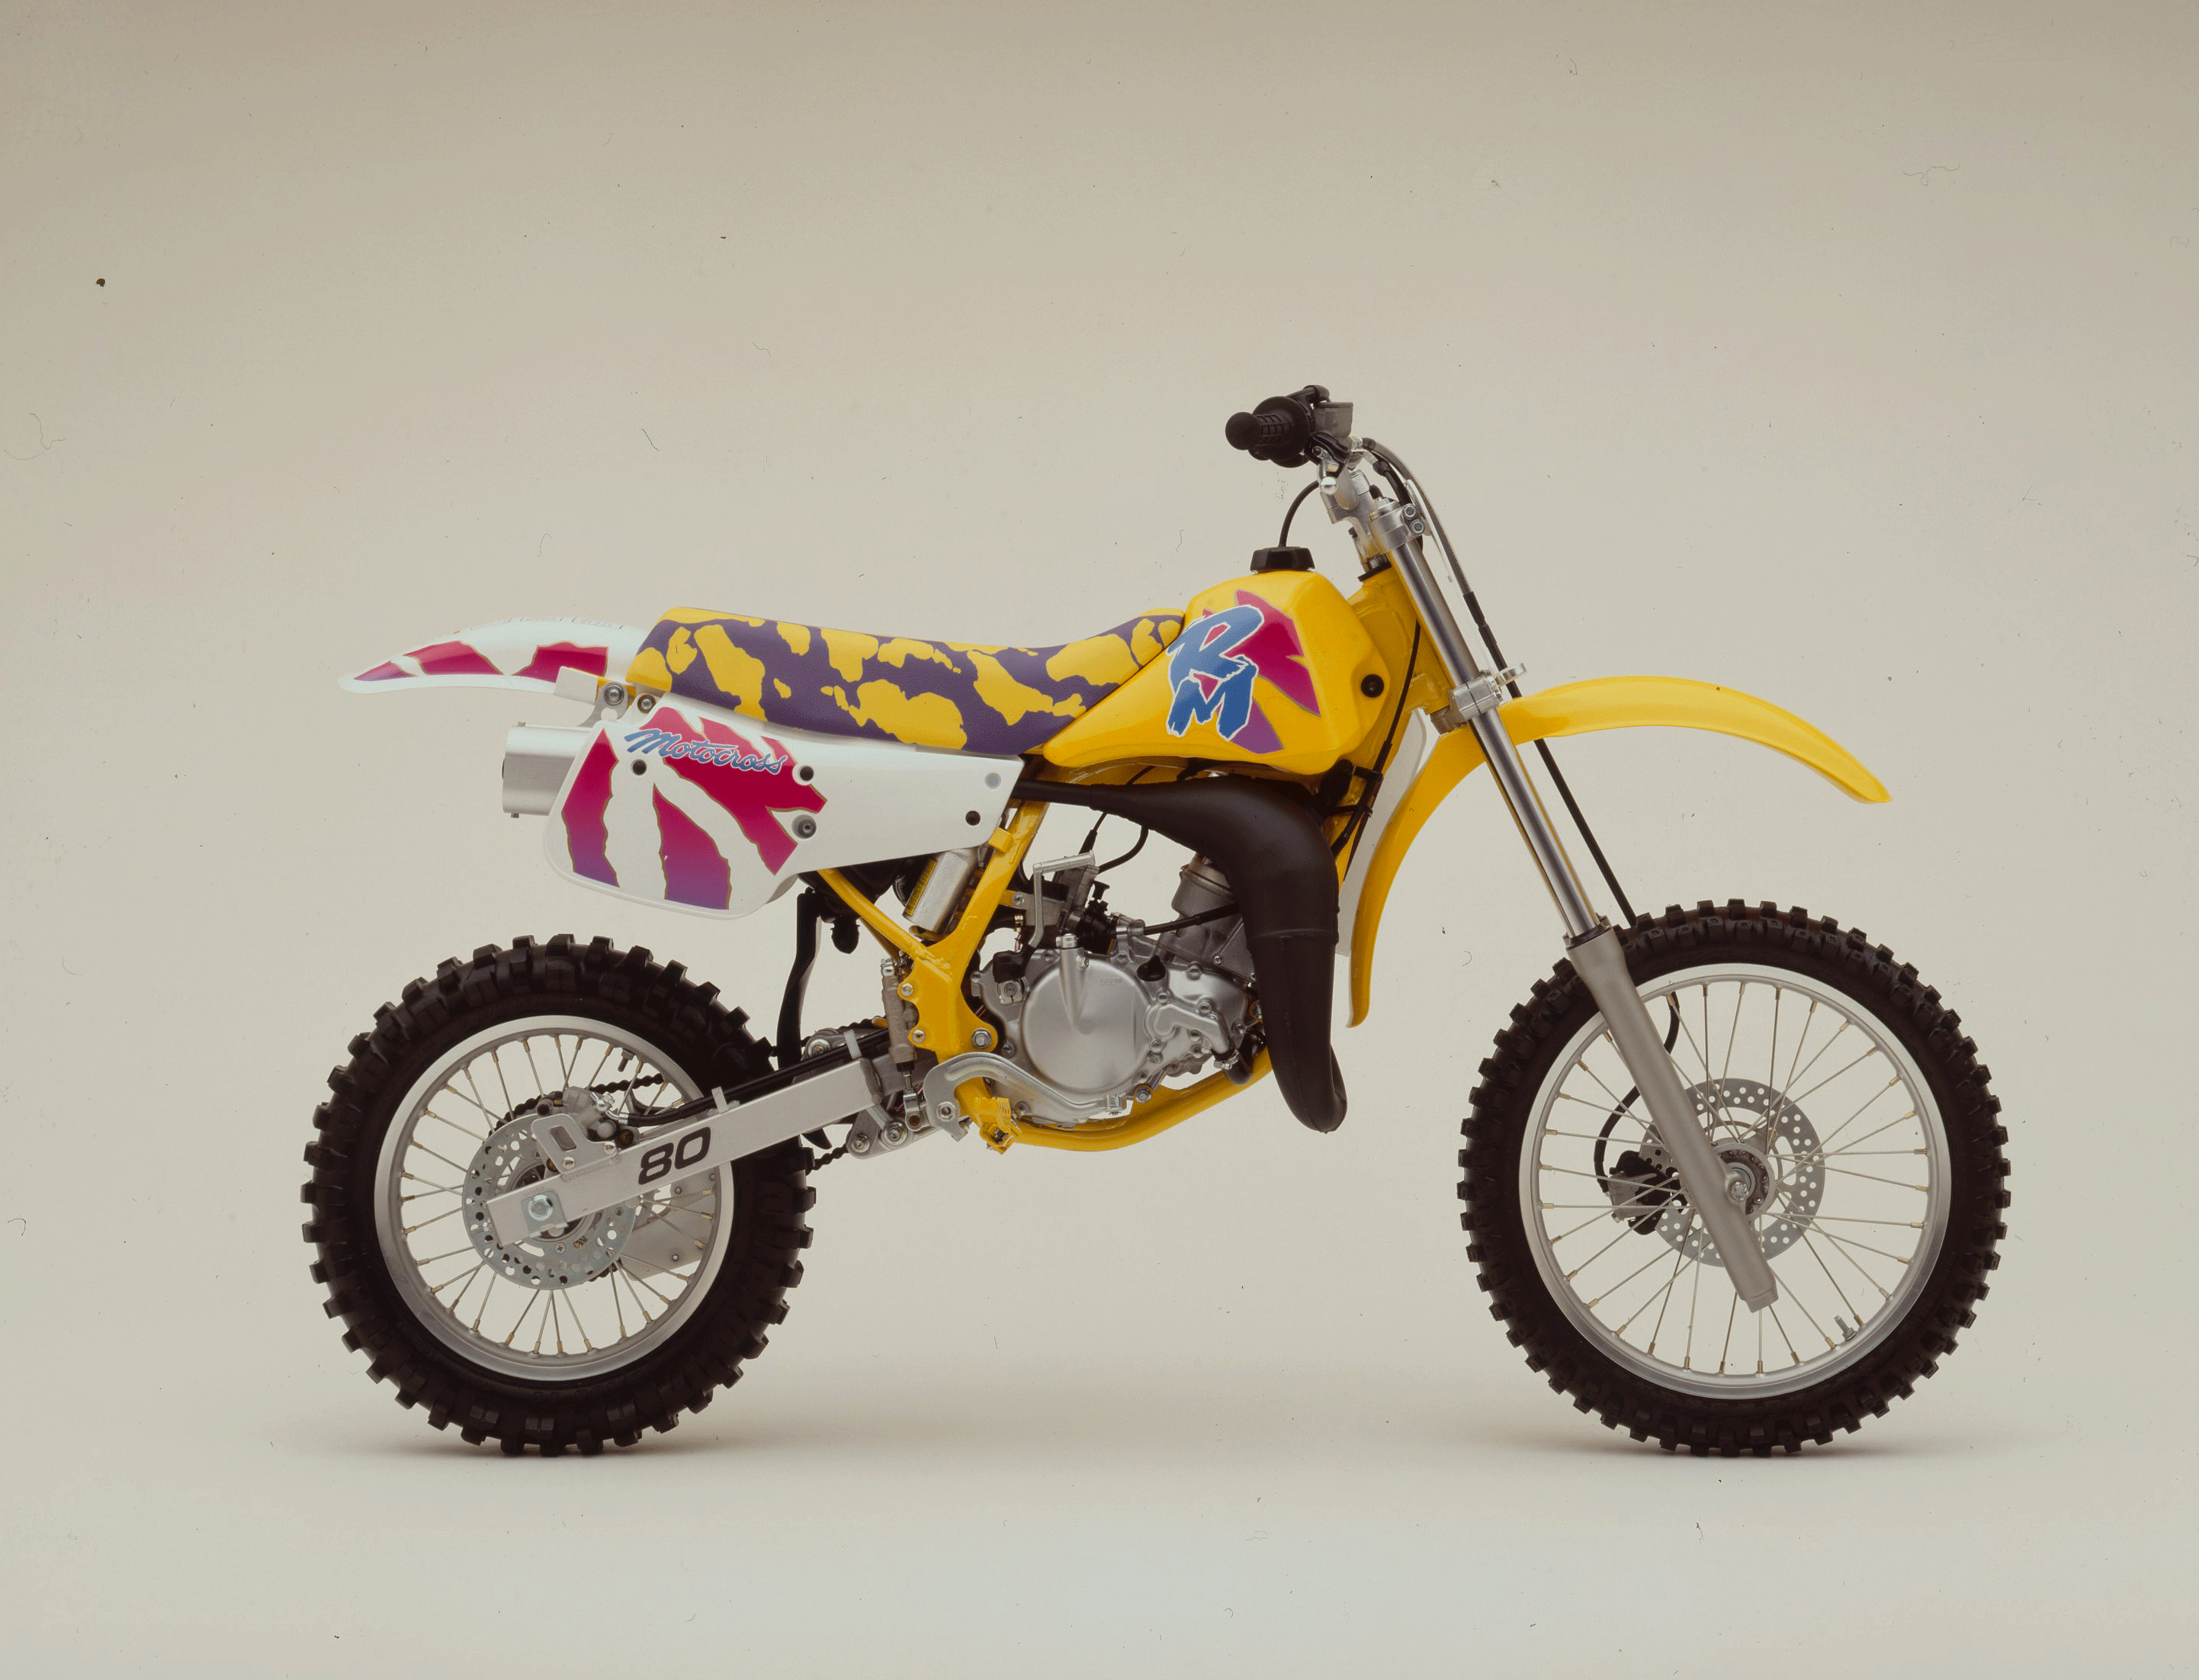 Cycle World said the 1992 Suzuki RM250 was “dazzling in eye-popping coats of multiple colors.”